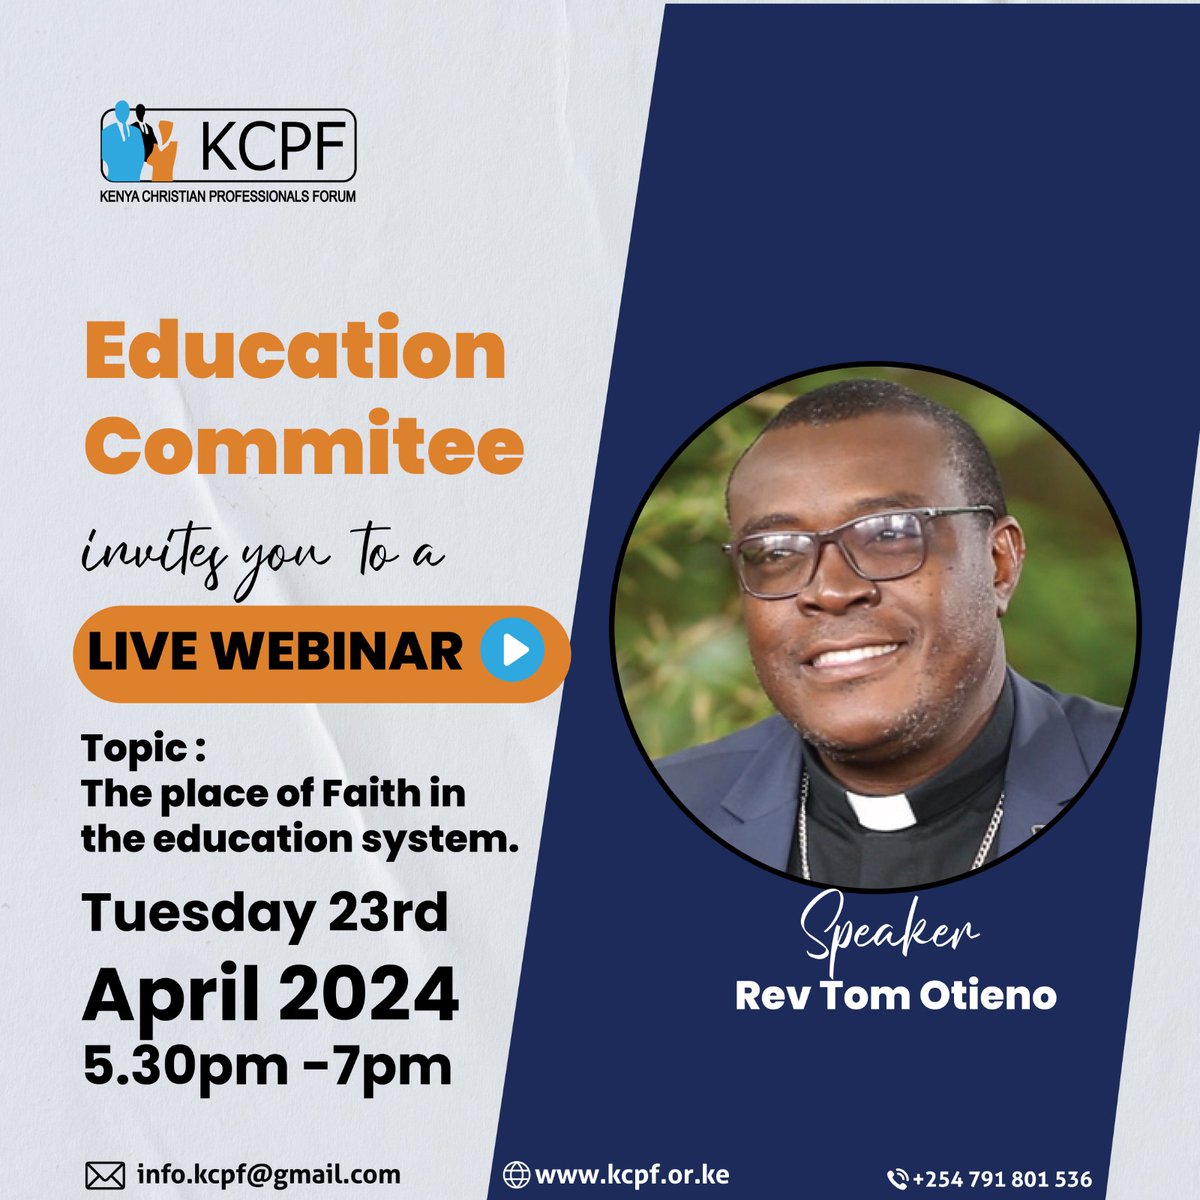 KCPF invites you tomorrow for a live webinar. The topic is 'The place of faith in the education system by Rev Tom Otieno. Don't miss out! zoom details: Meeting ID: 864 7616 5706 Passcode: 844496